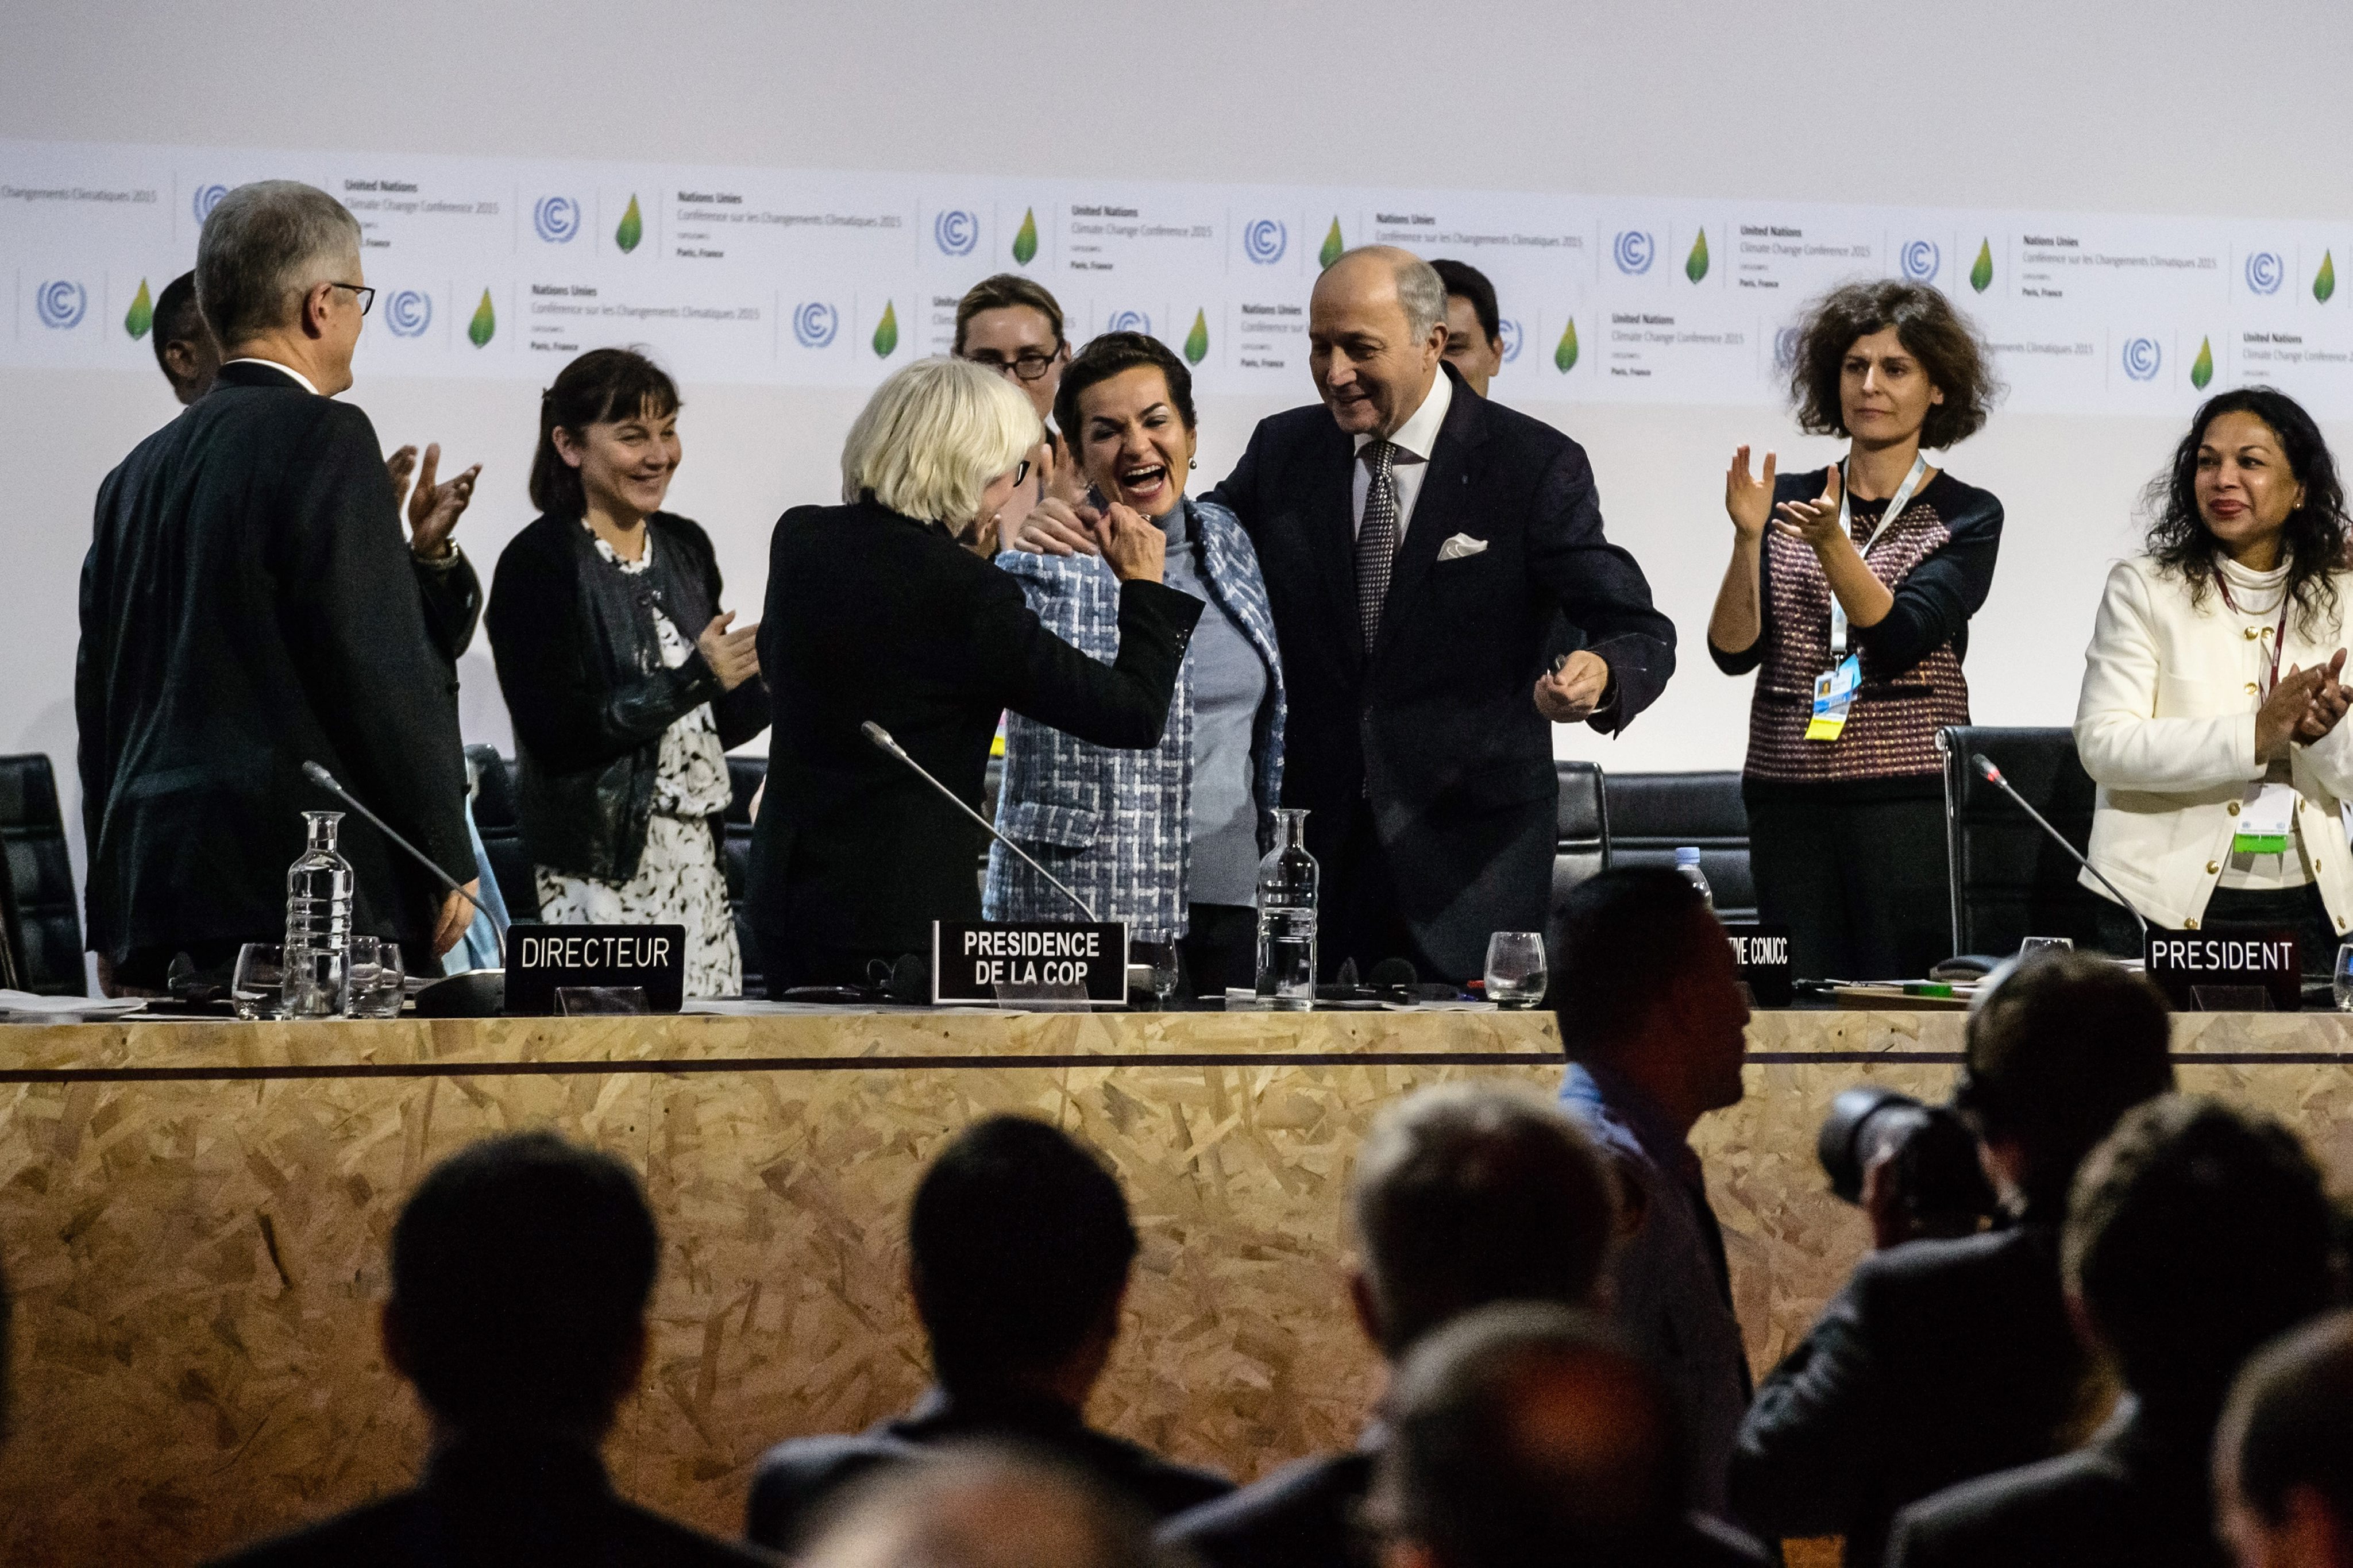 French Special Representative for the 2015 Paris Climate Conference Laurence Tubiana (third left), Executive Secretary of the UN Framework Convention on Climate Change Christiana Figueres (centre) and French Foreign Minister Laurent Fabius (third right) after the adoption of the COP21 final agreement at the World Climate Change Conference 2015 in Le Bourget, north of Paris. Photo: EPA